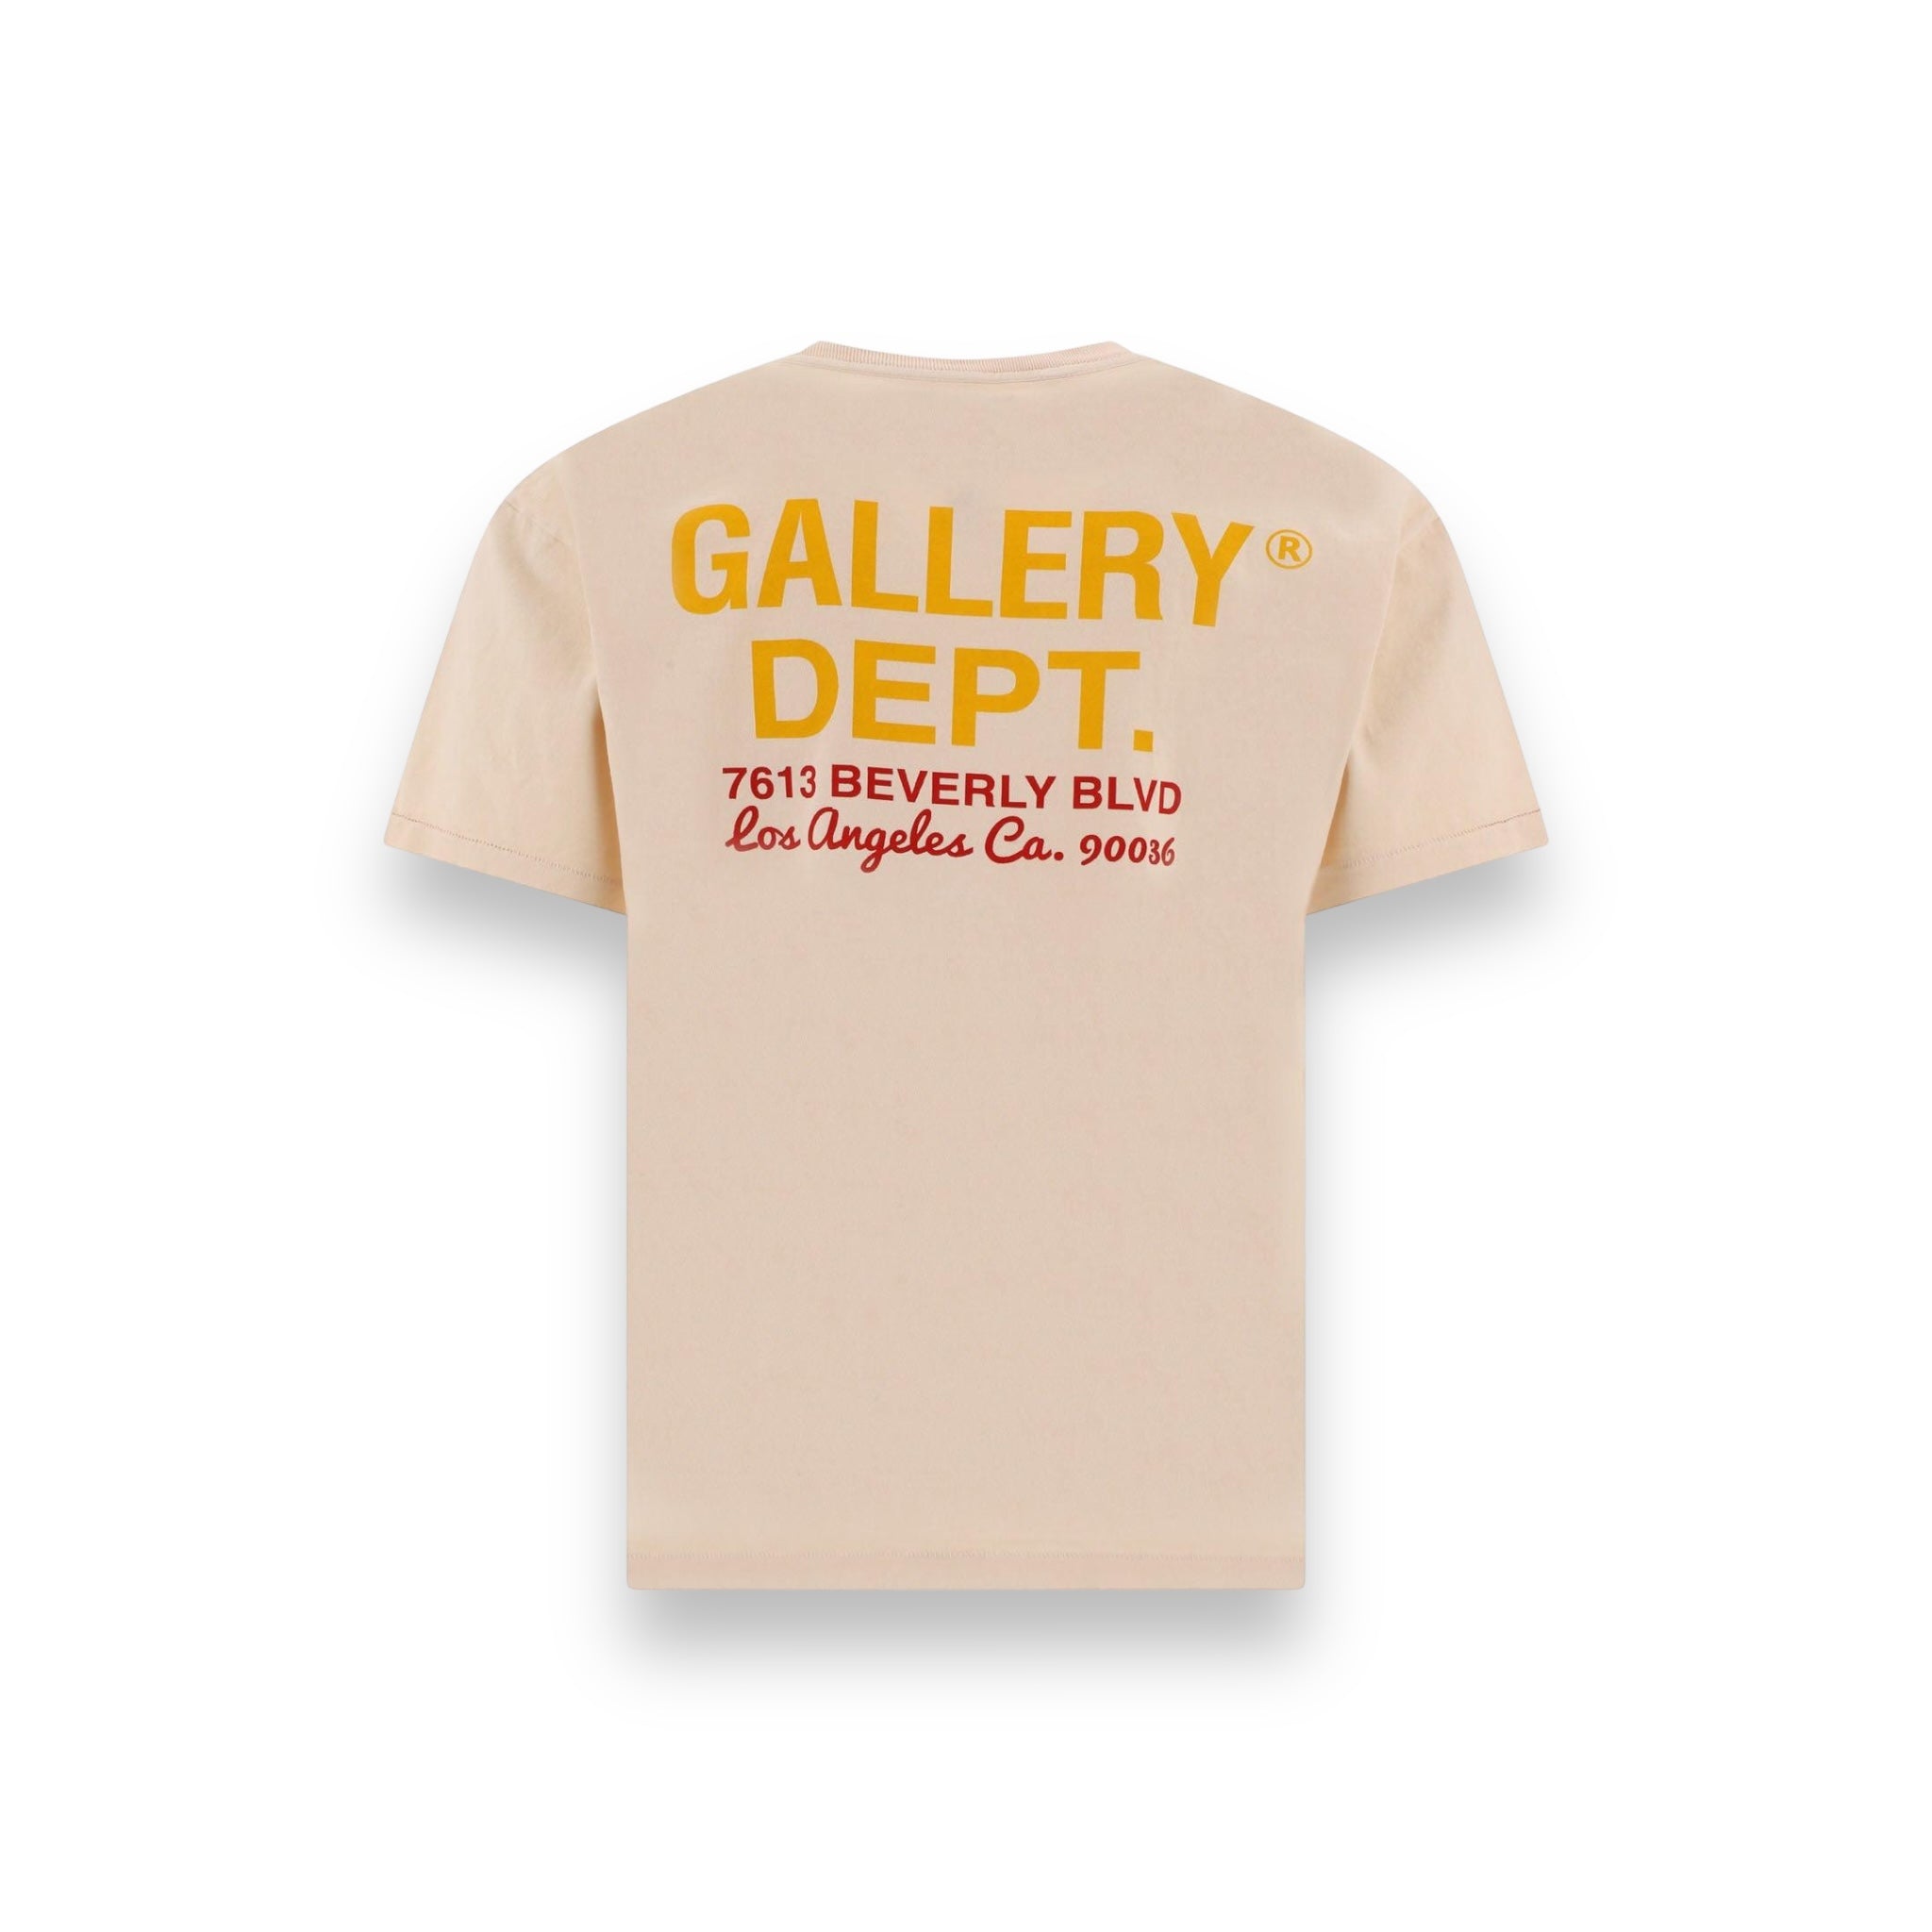 Gallery Dept. Natural "Venice Carshow" T-shirt